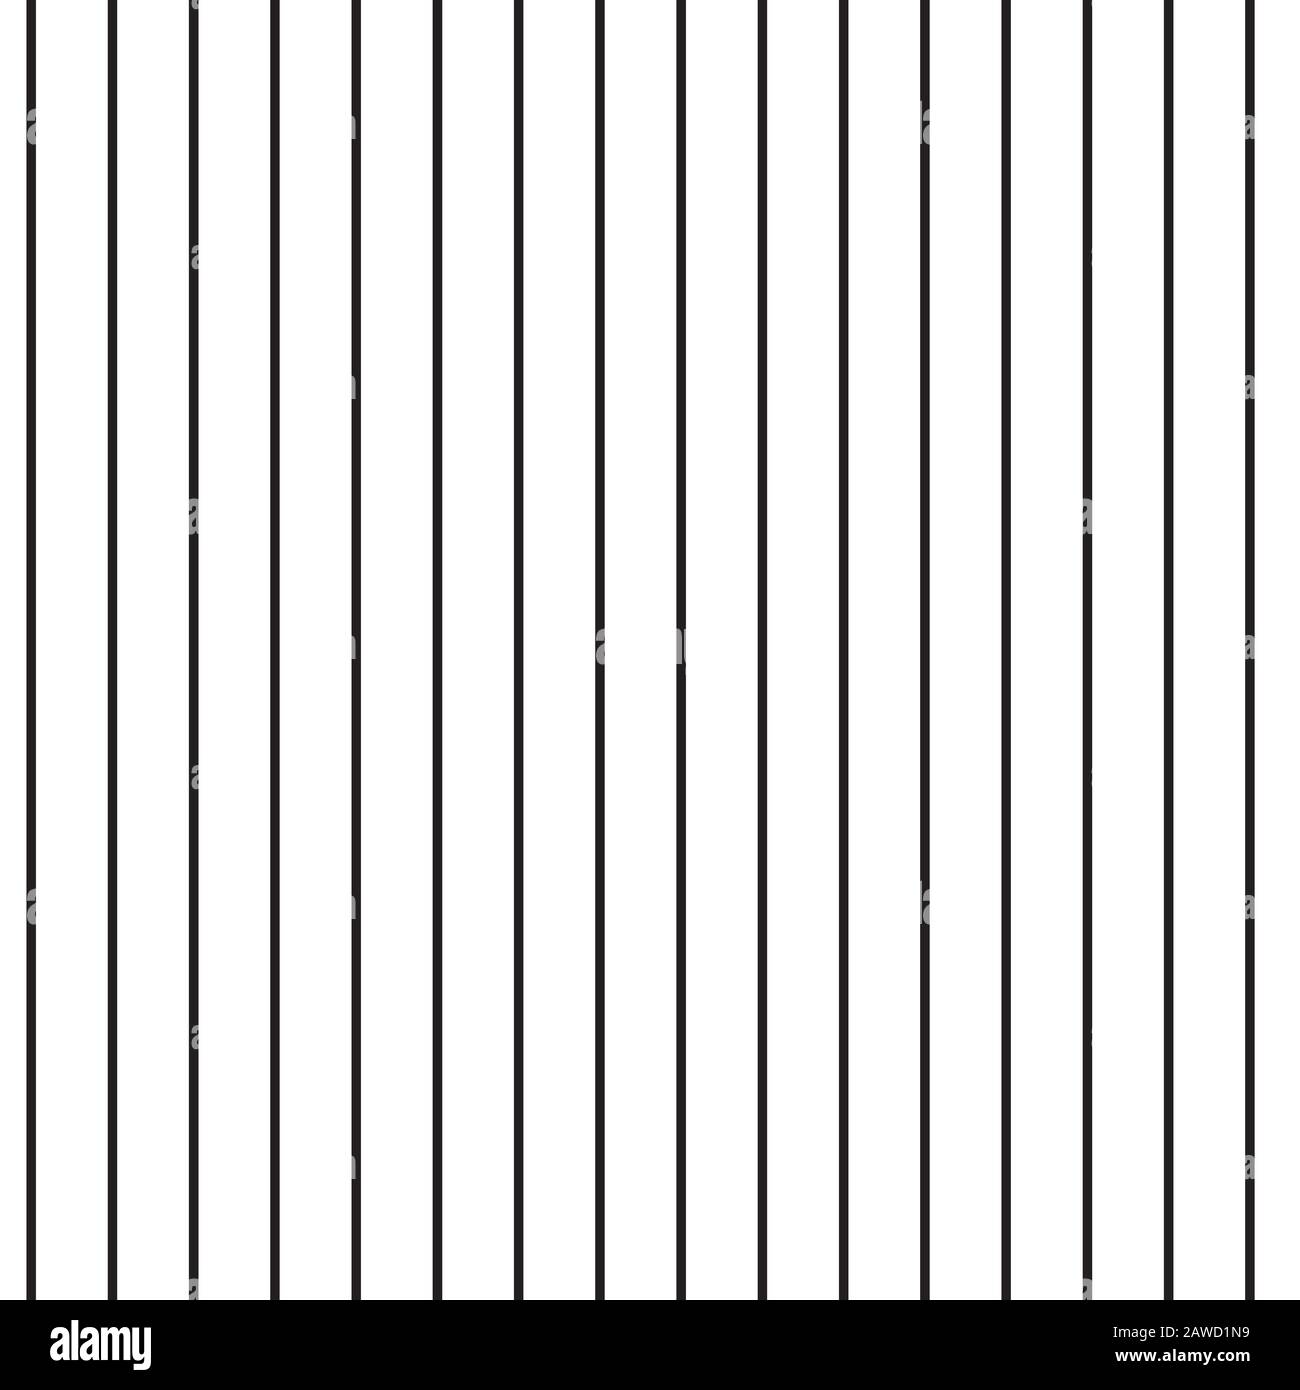 https://c8.alamy.com/comp/2AWD1N9/vertical-stripes-pattern-seamless-pattern-of-black-and-white-colors-of-small-repetitive-strips-linear-monochrome-geometric-texture-simple-modern-ab-2AWD1N9.jpg